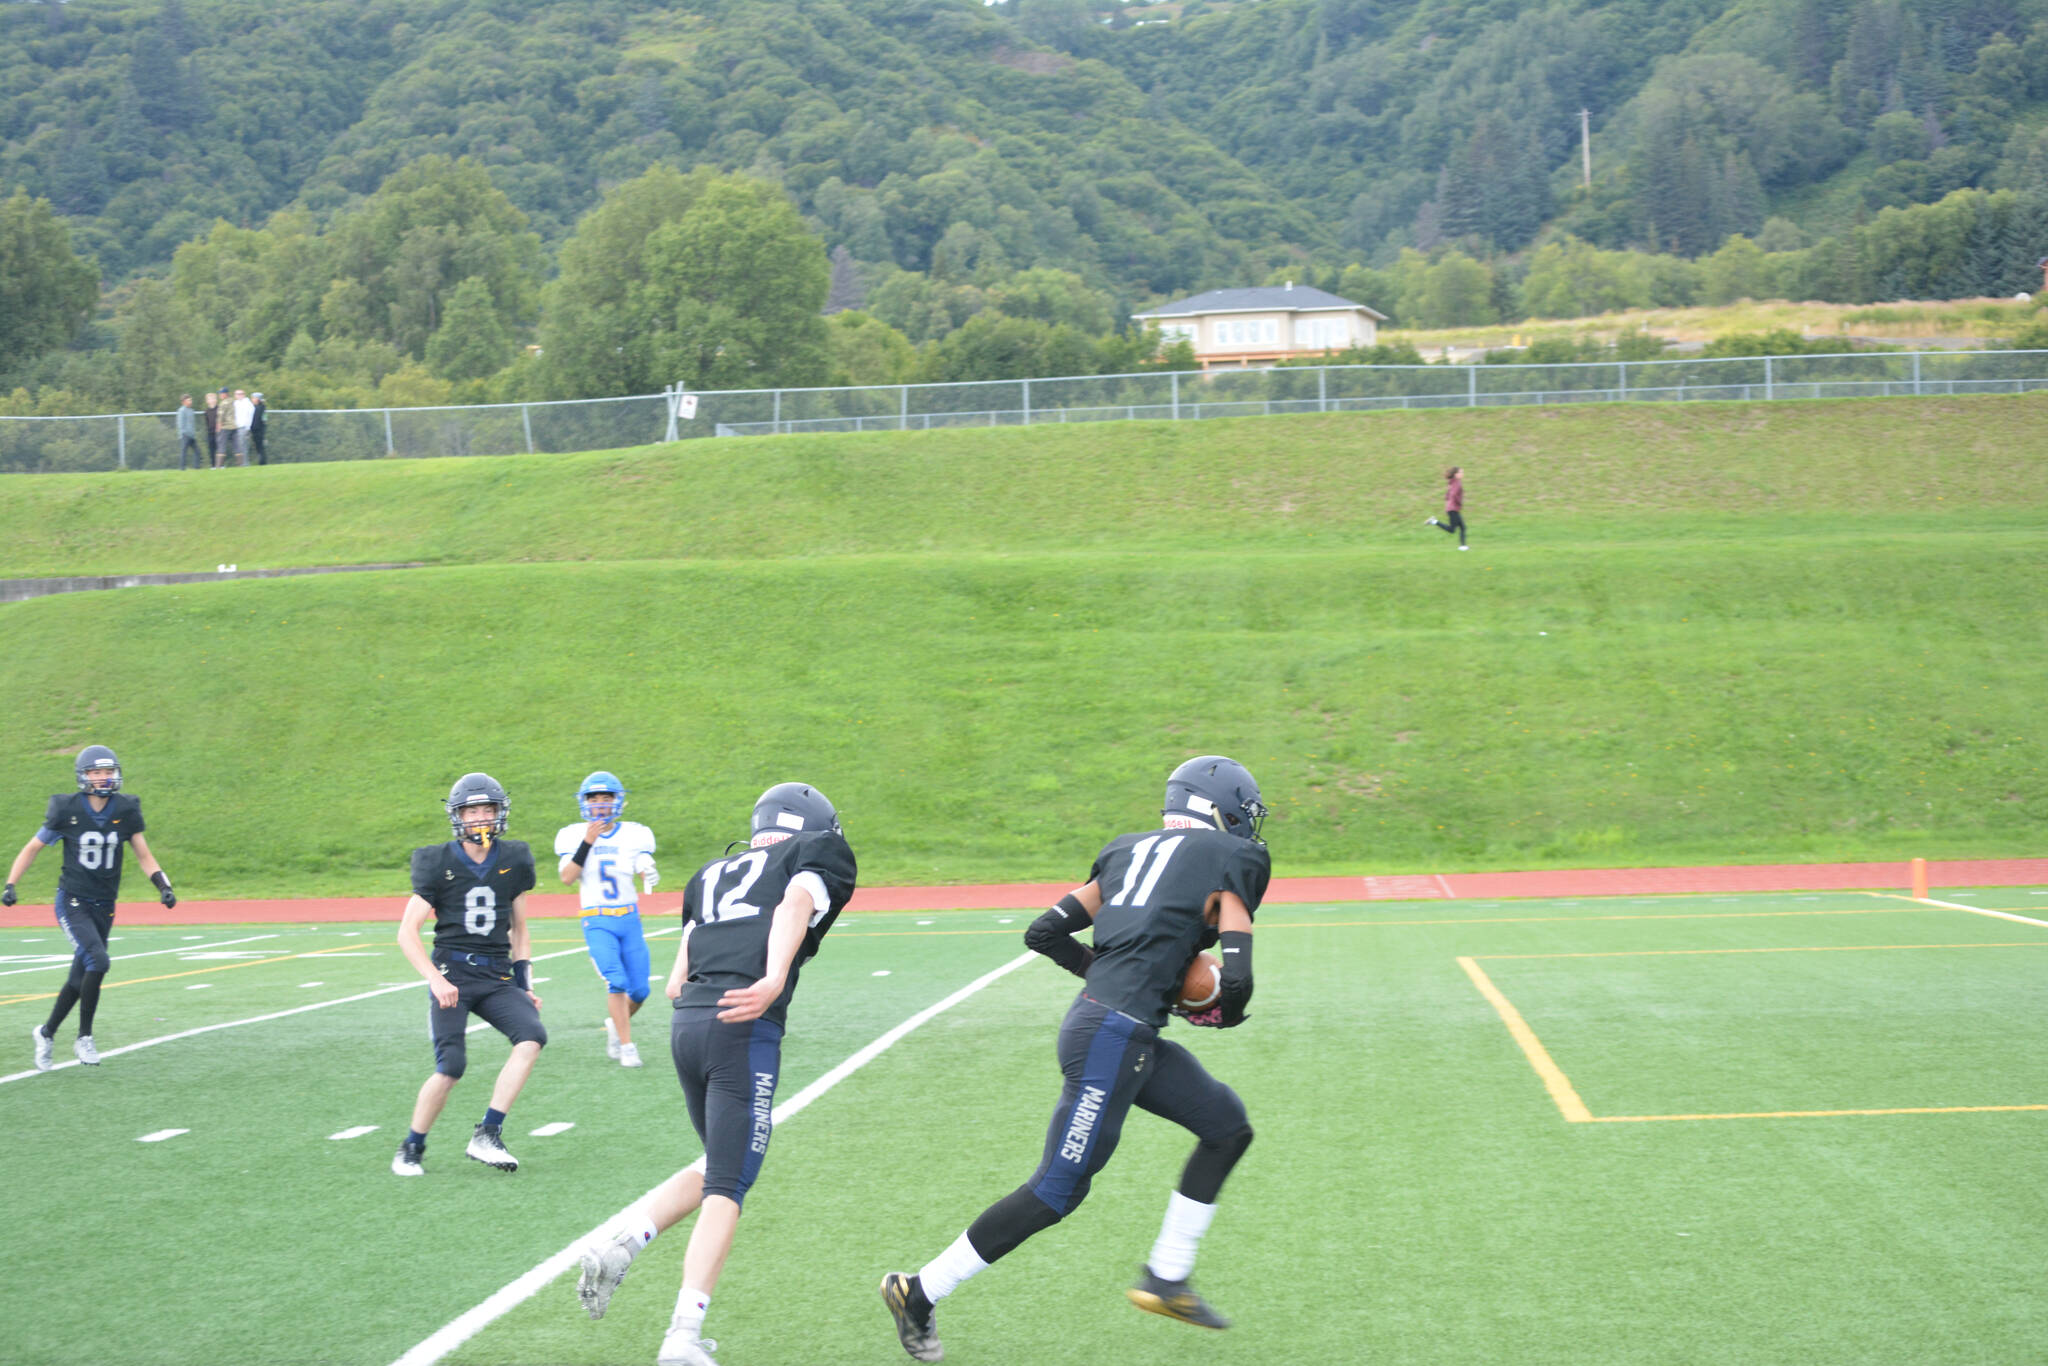 Techie carries the ball into the endzone after a stellar catch on Saturday, Aug. 13, 2022, at Homer High School in Homer, Alaska. (Photo by Charlie Menke/ Homer News)